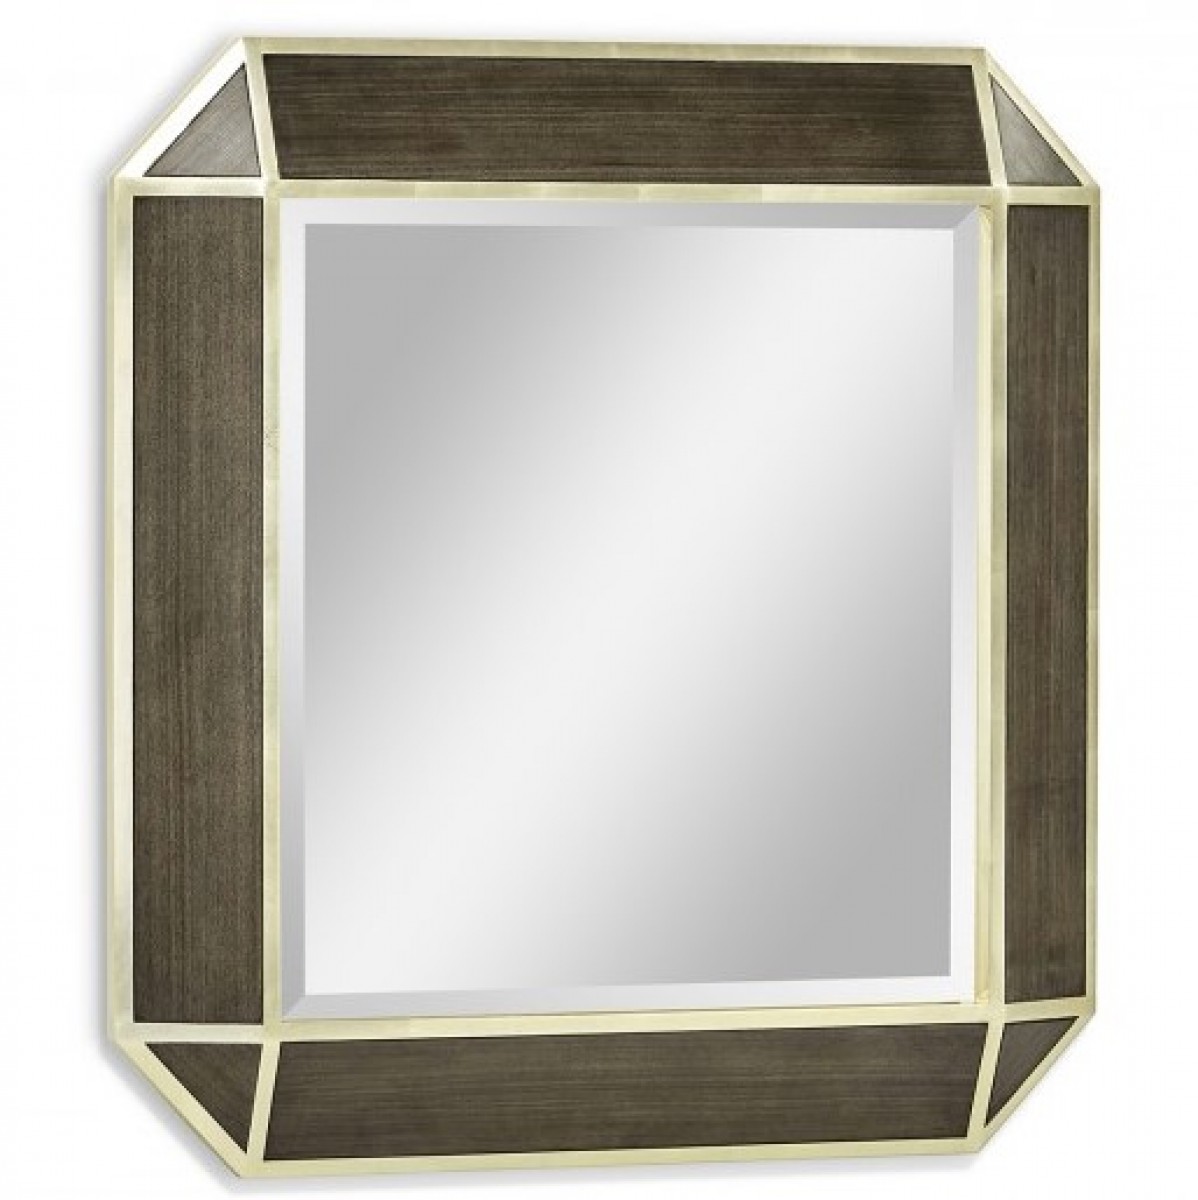 Gatsby 48" Square Bevelled Mirror